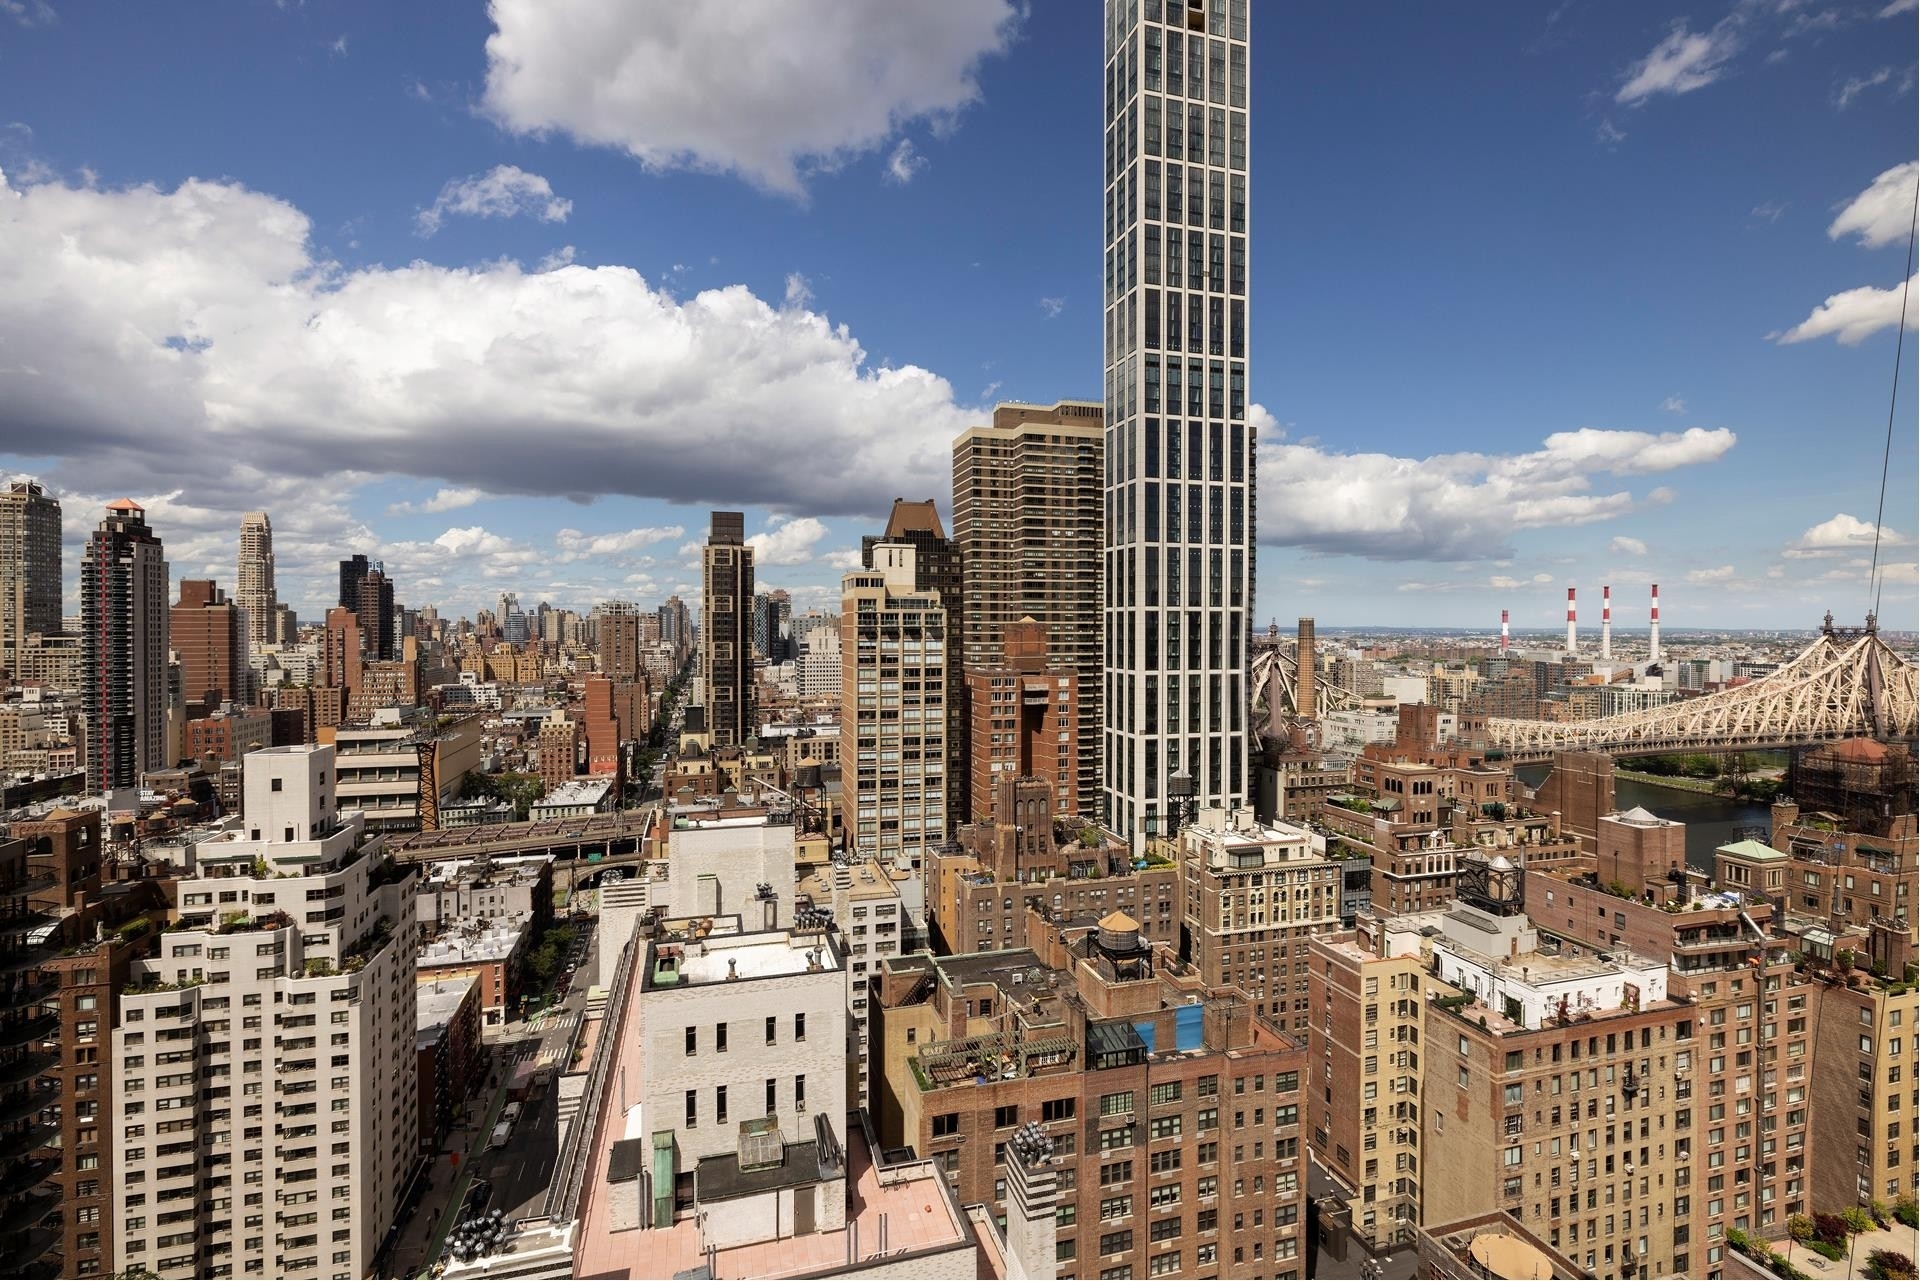 Co-op Properties for Sale at Plaza 400, 400 E 56TH ST, 33D Sutton Place, New York, New York 10022